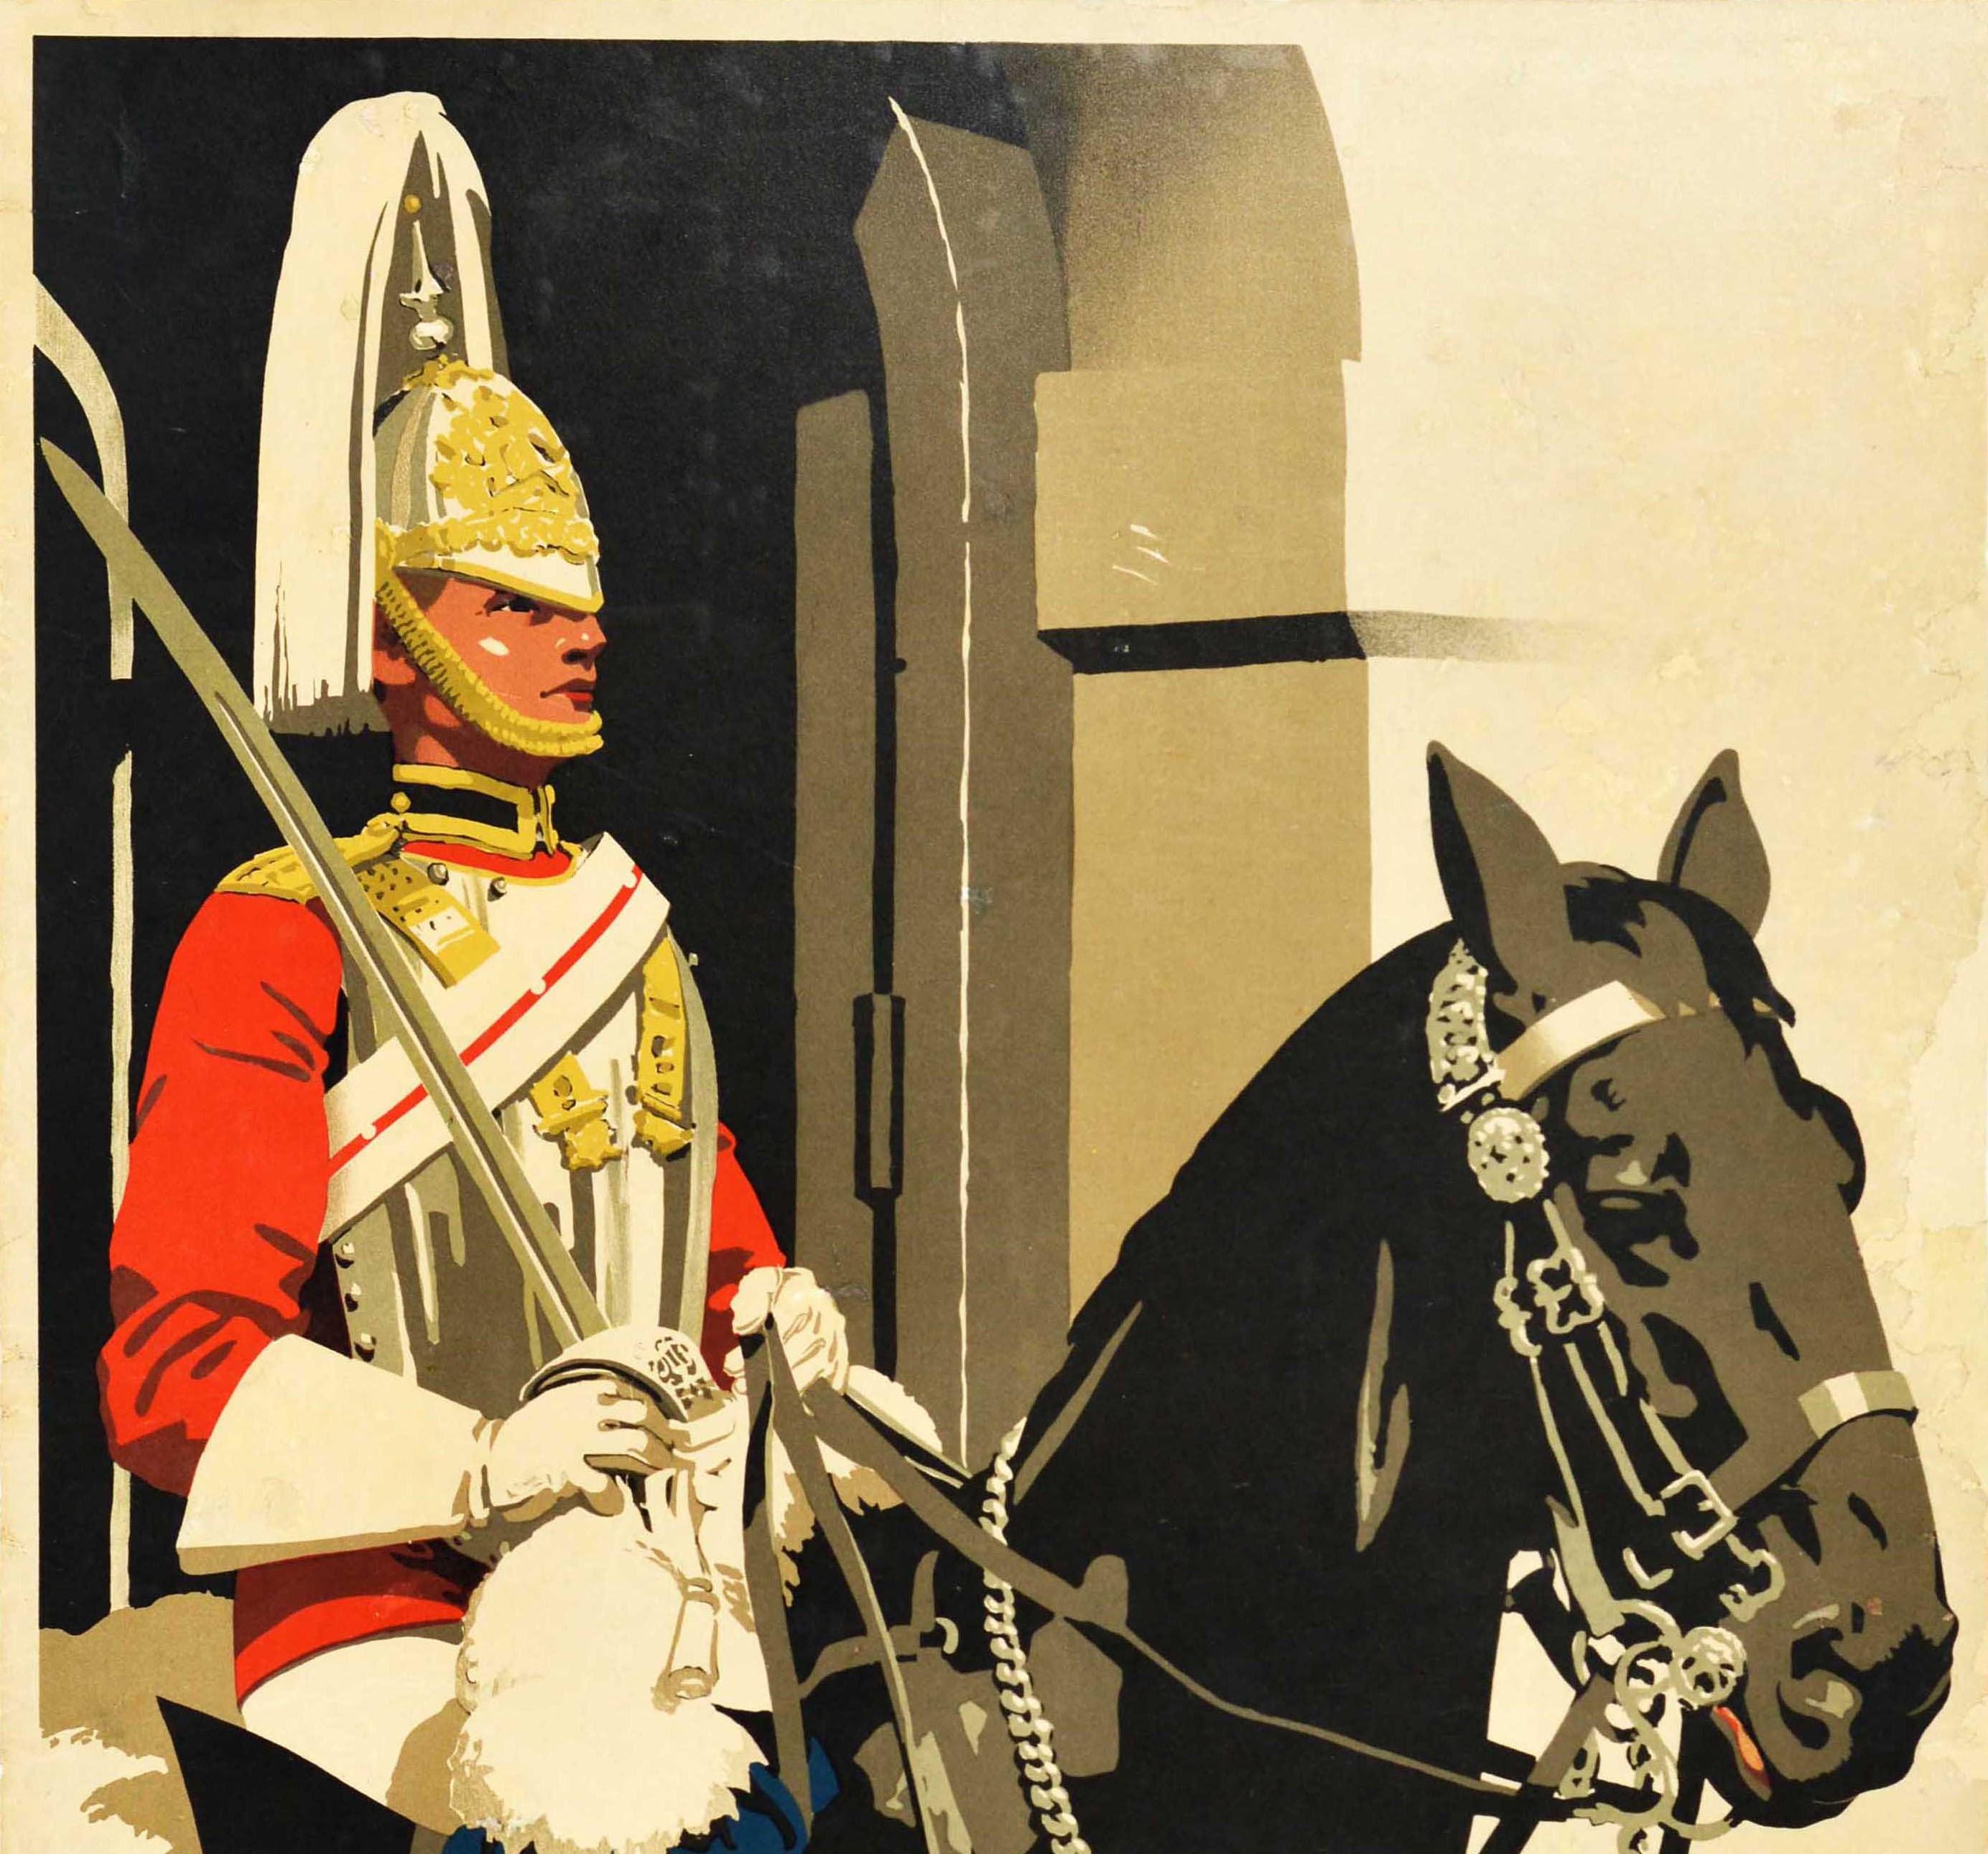 Original vintage travel poster advertising London Heart of the Empire issued by GWR Great Western Railway featuring a great design by the notable British poster artist Frank Newbould (1887-1951) of a Royal Guard on a horse with the text and logo on